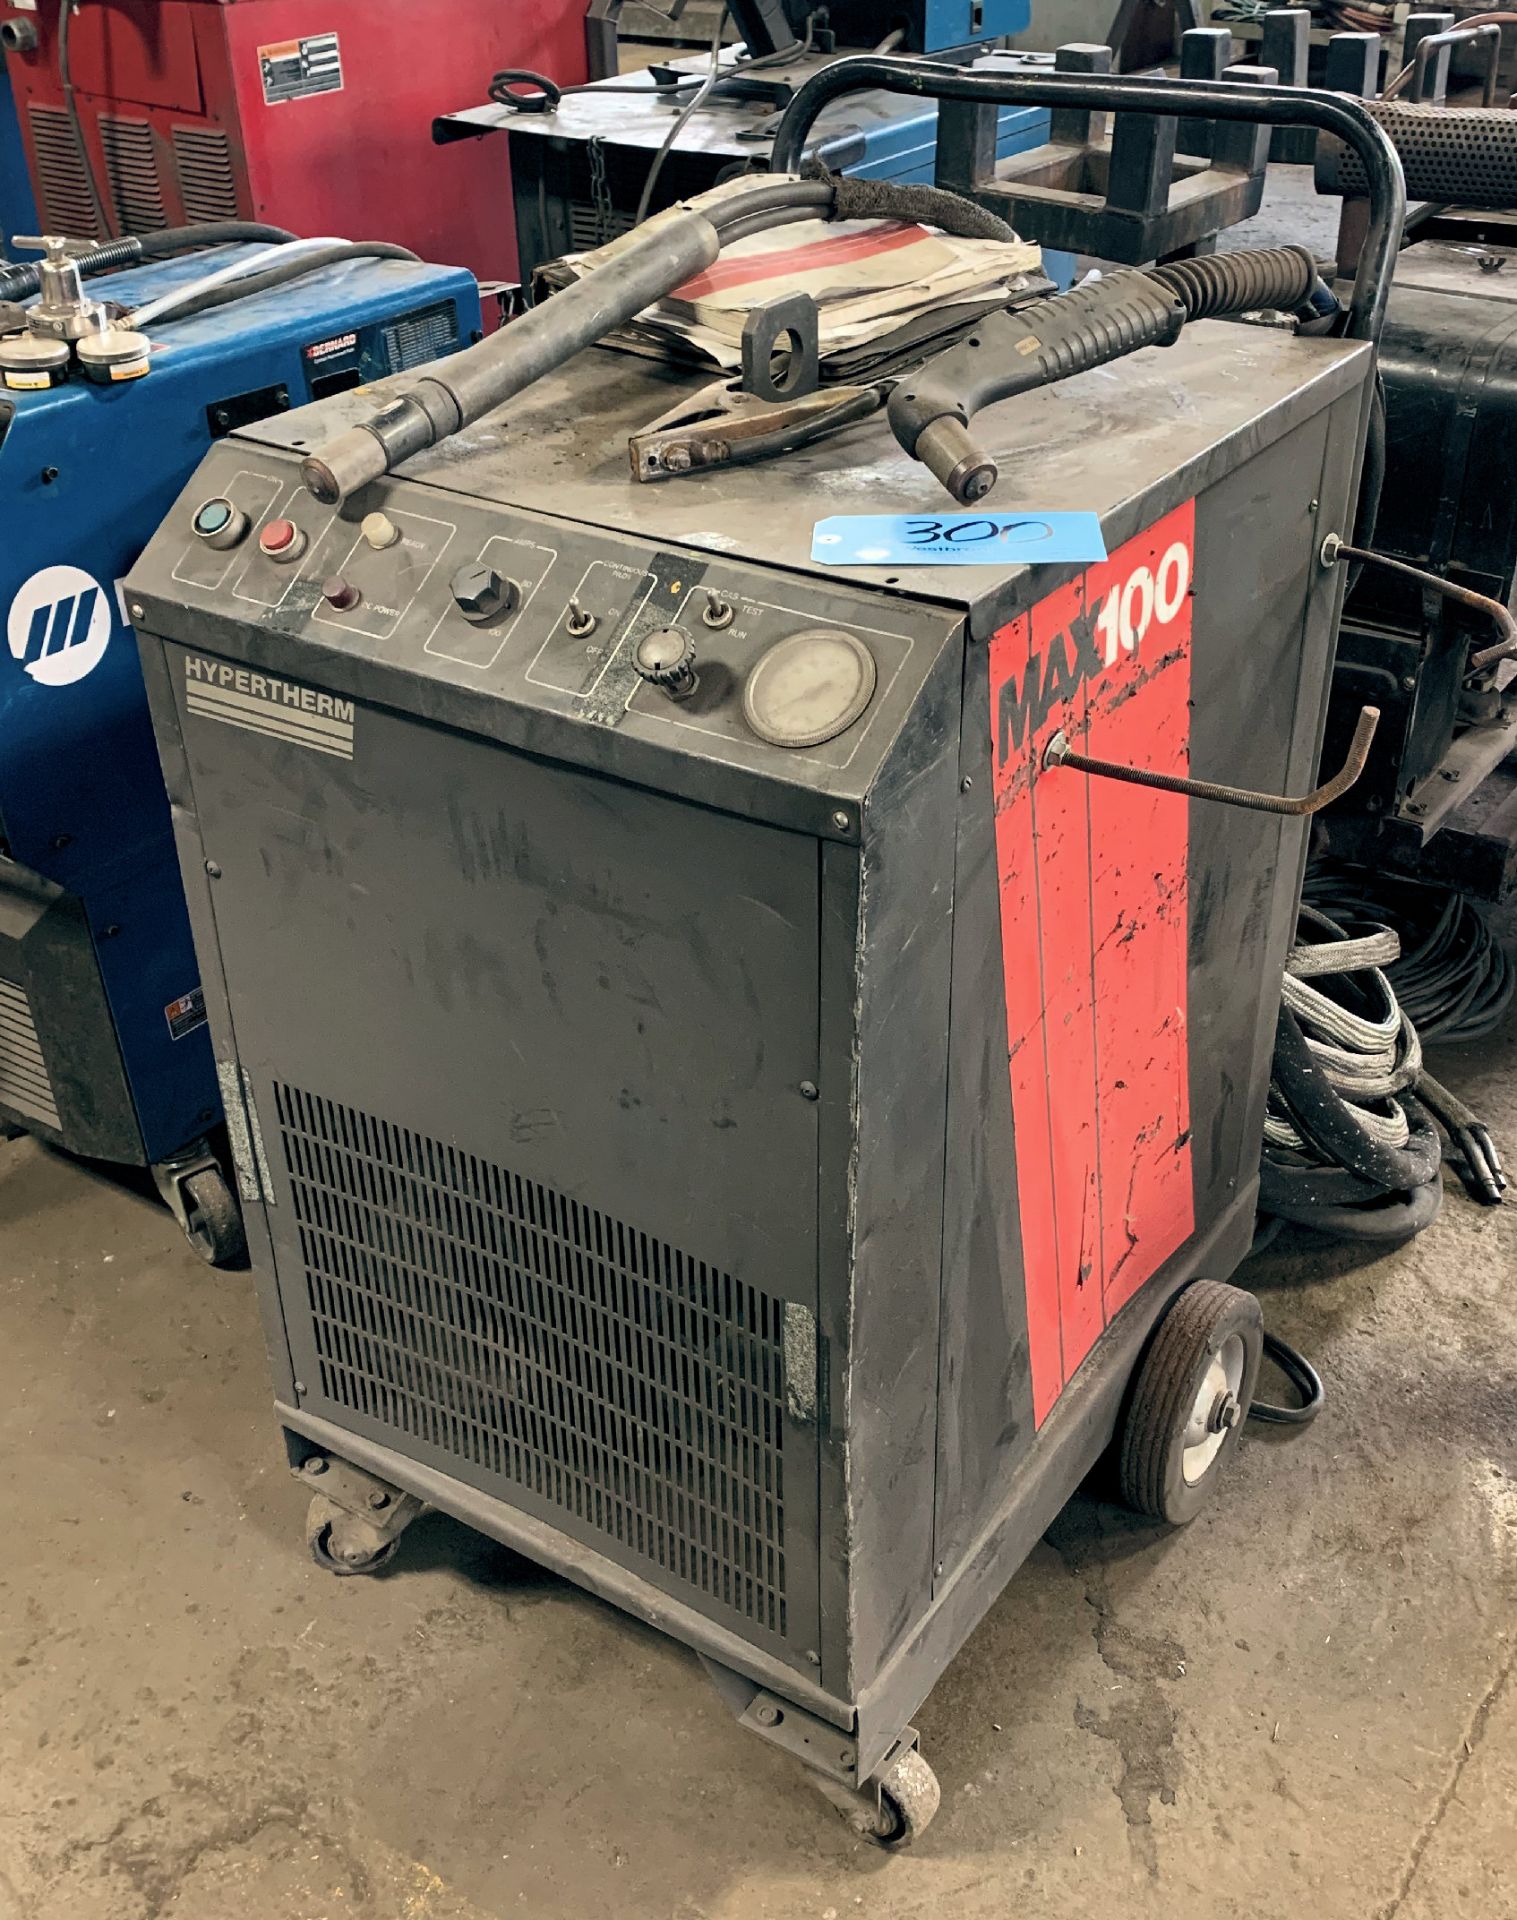 Hypertherm Model Max 100, Plasma Arc Cutting System, with Leads